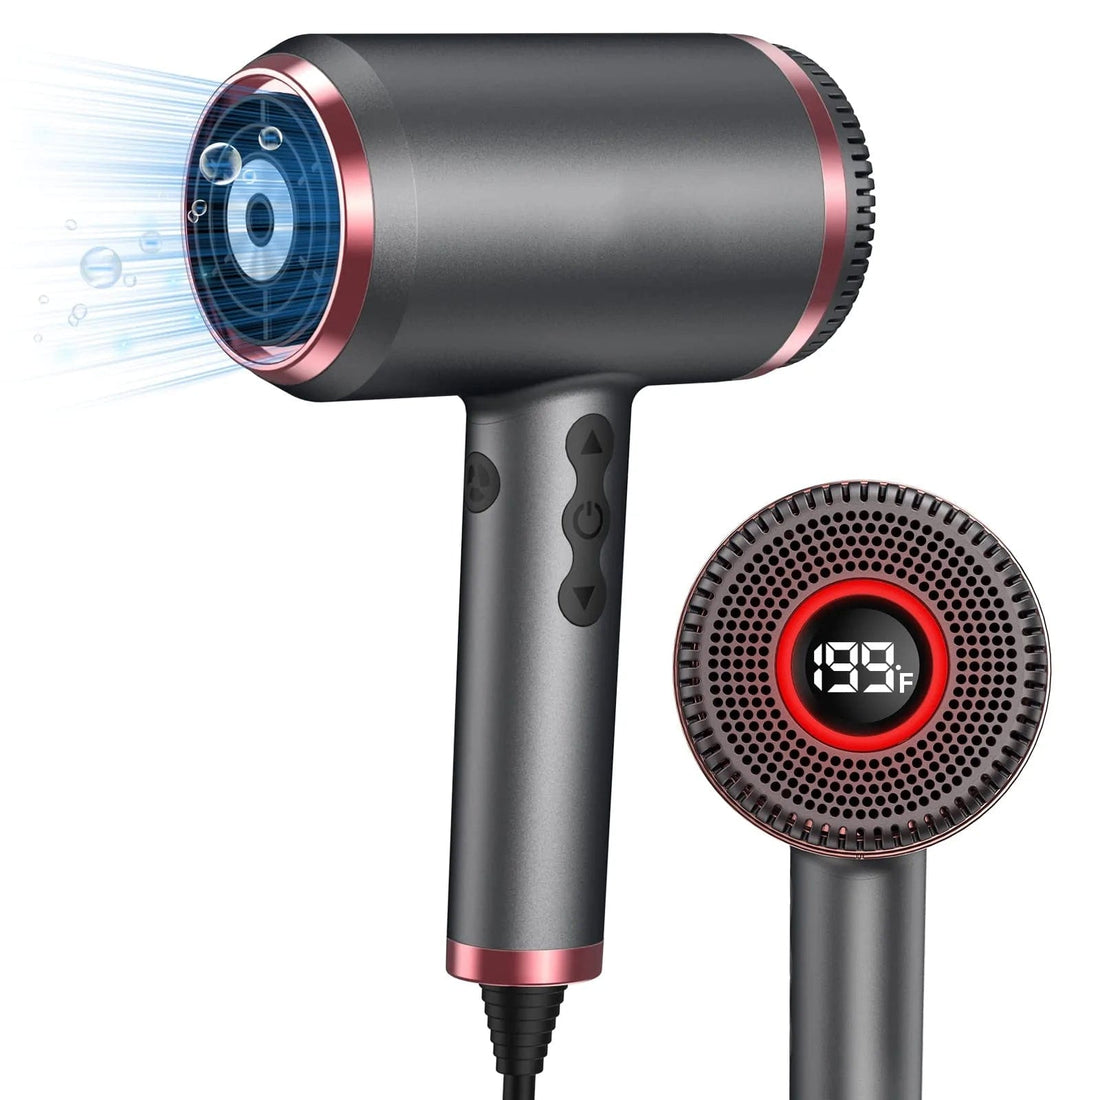 Ionic Hair Dryer HB1 Blow Dryer with LED Display US Plug